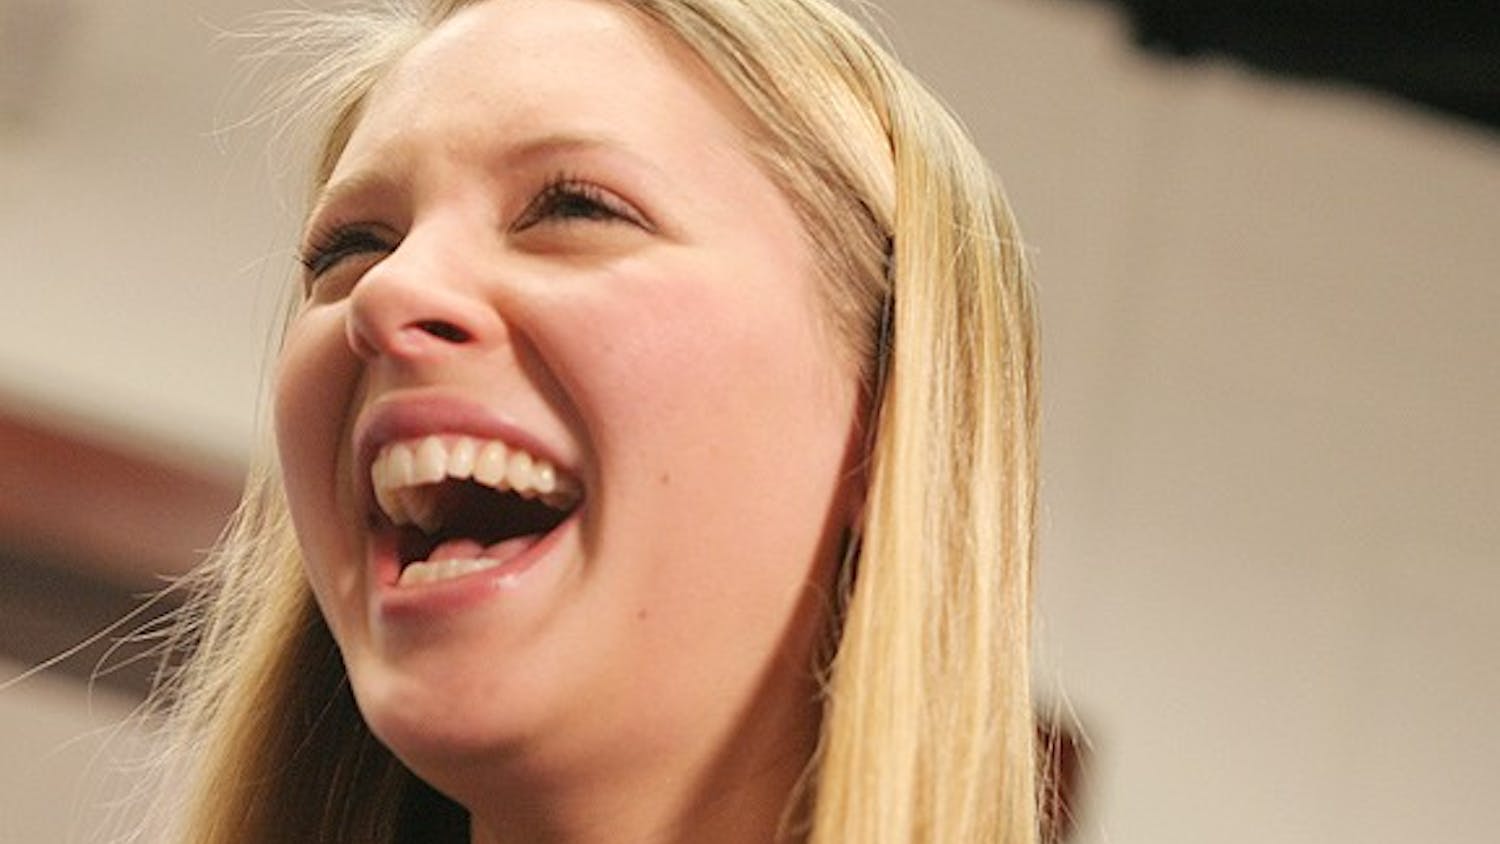 Eve Carson, the 2008 UNC Student Body President, laughs in a photo.